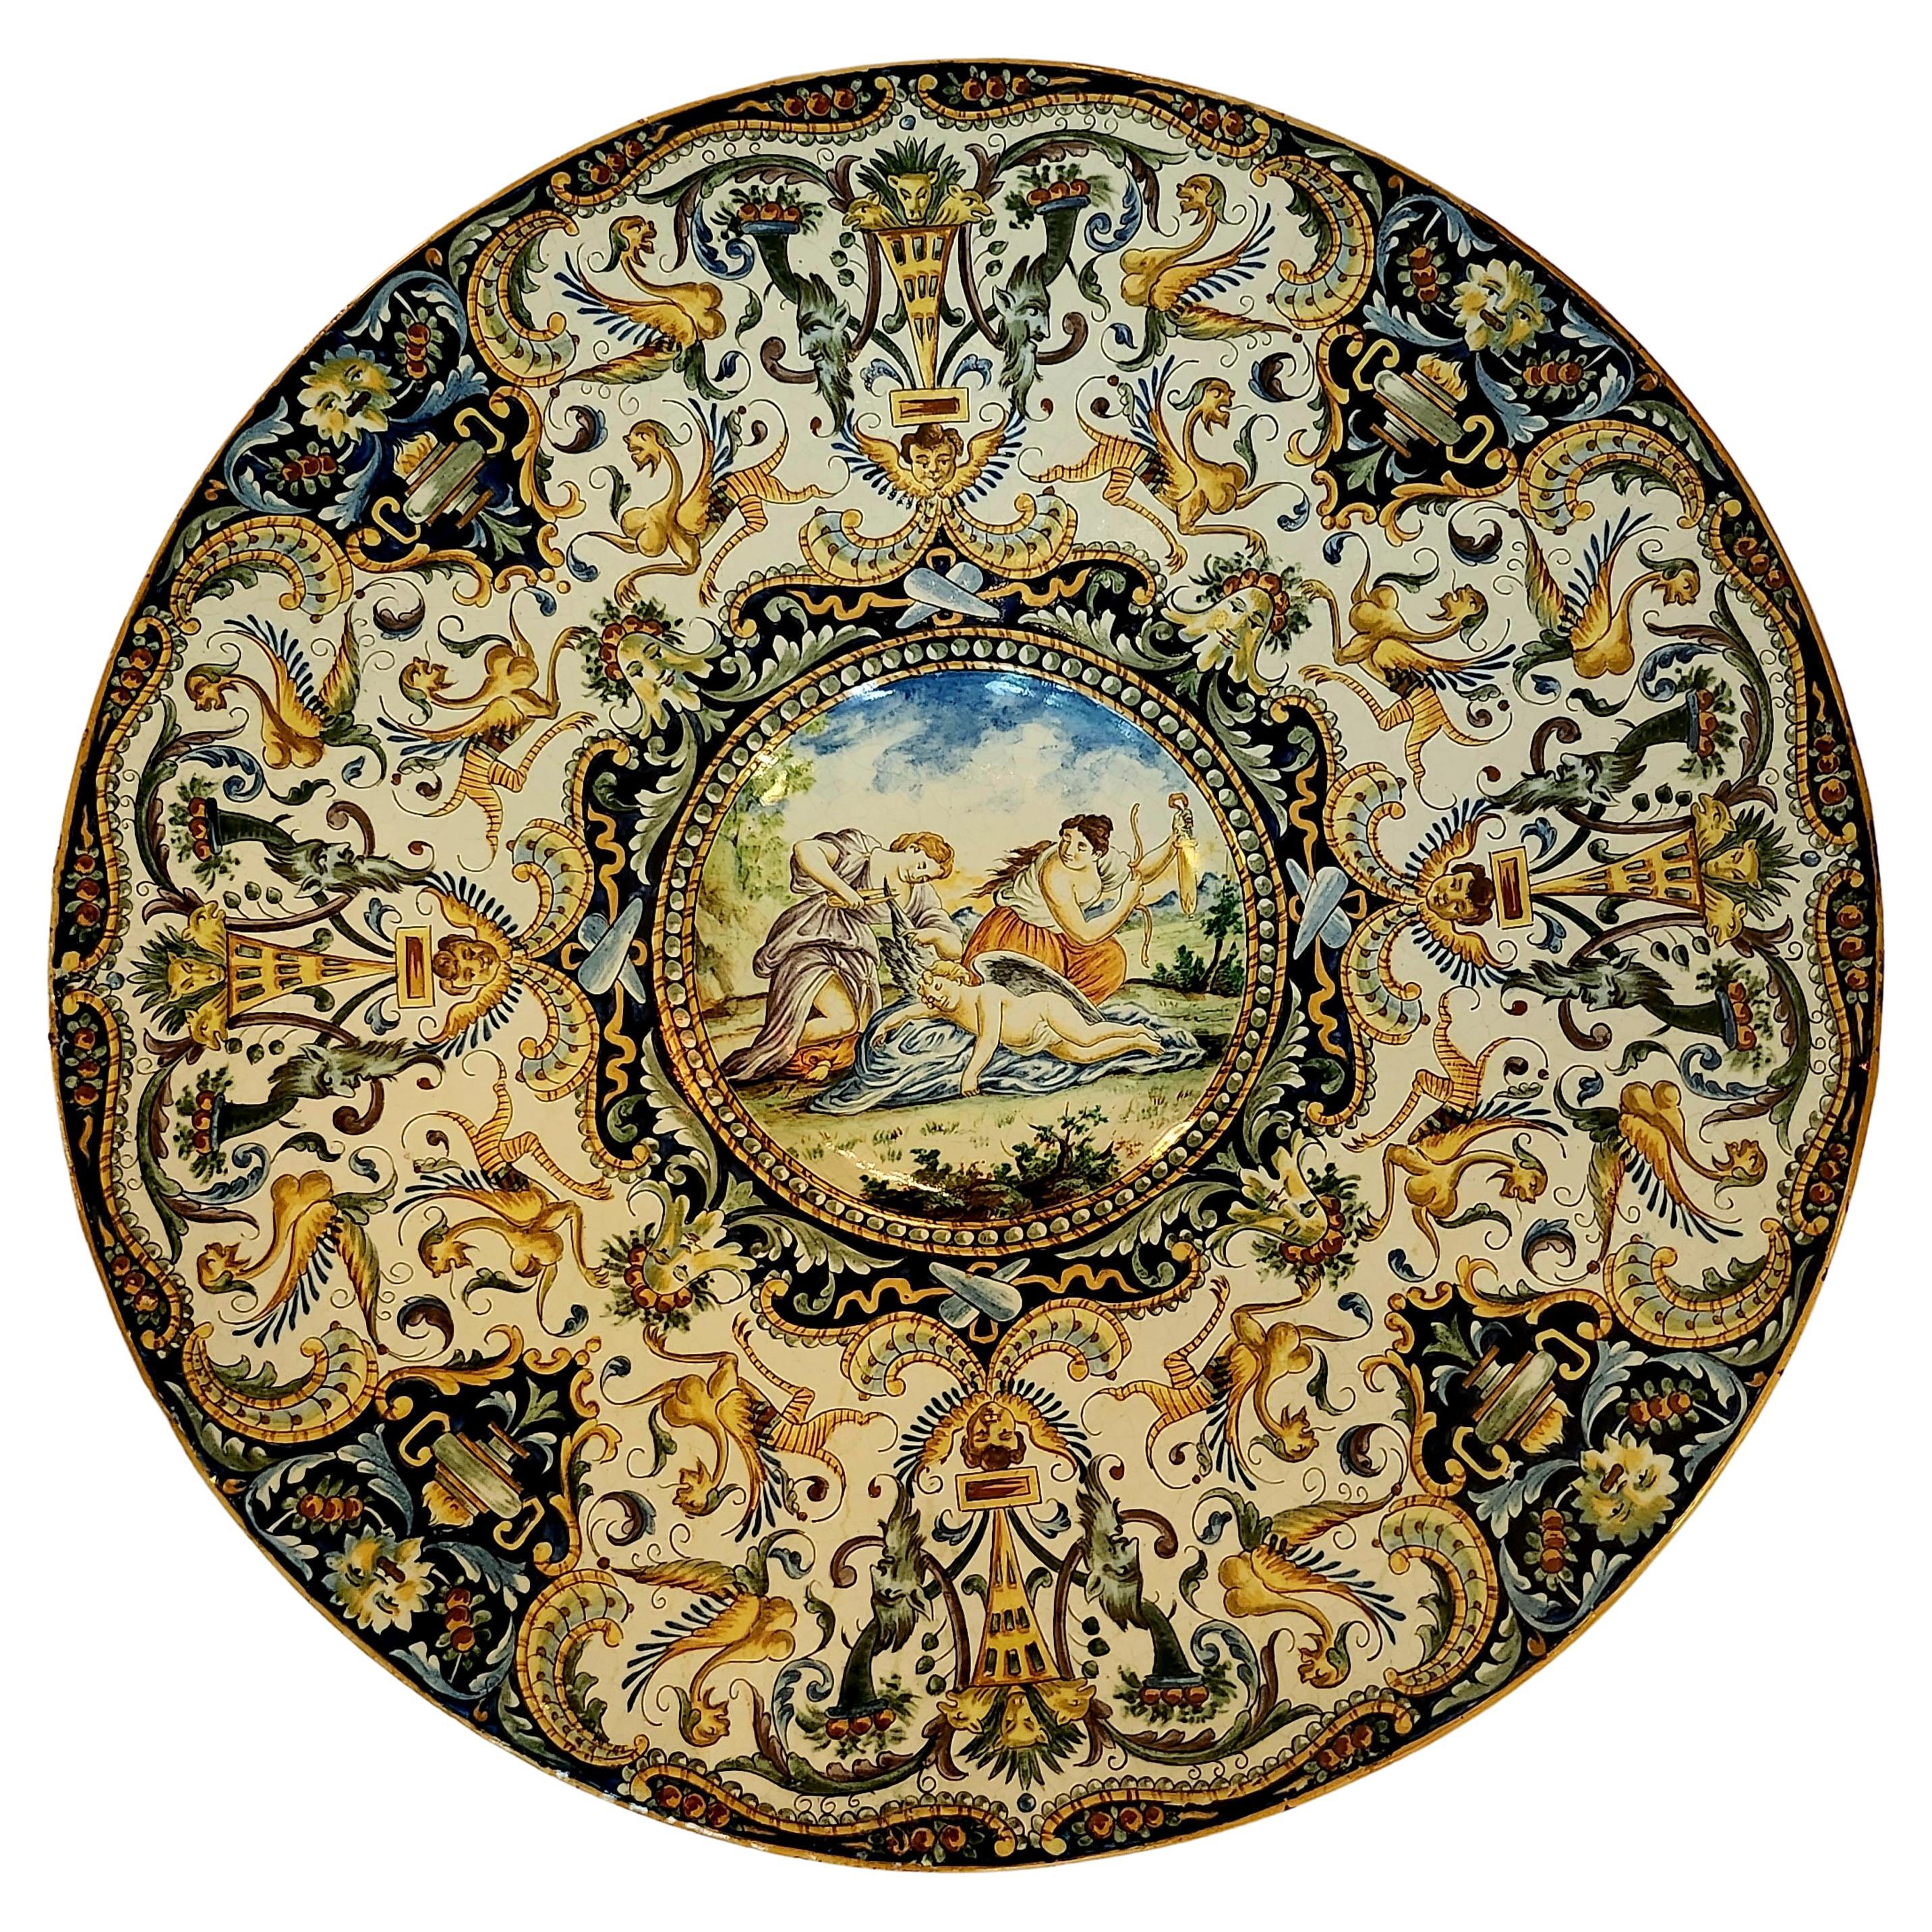 A Large Italian Maiolica Charger, 19th Century